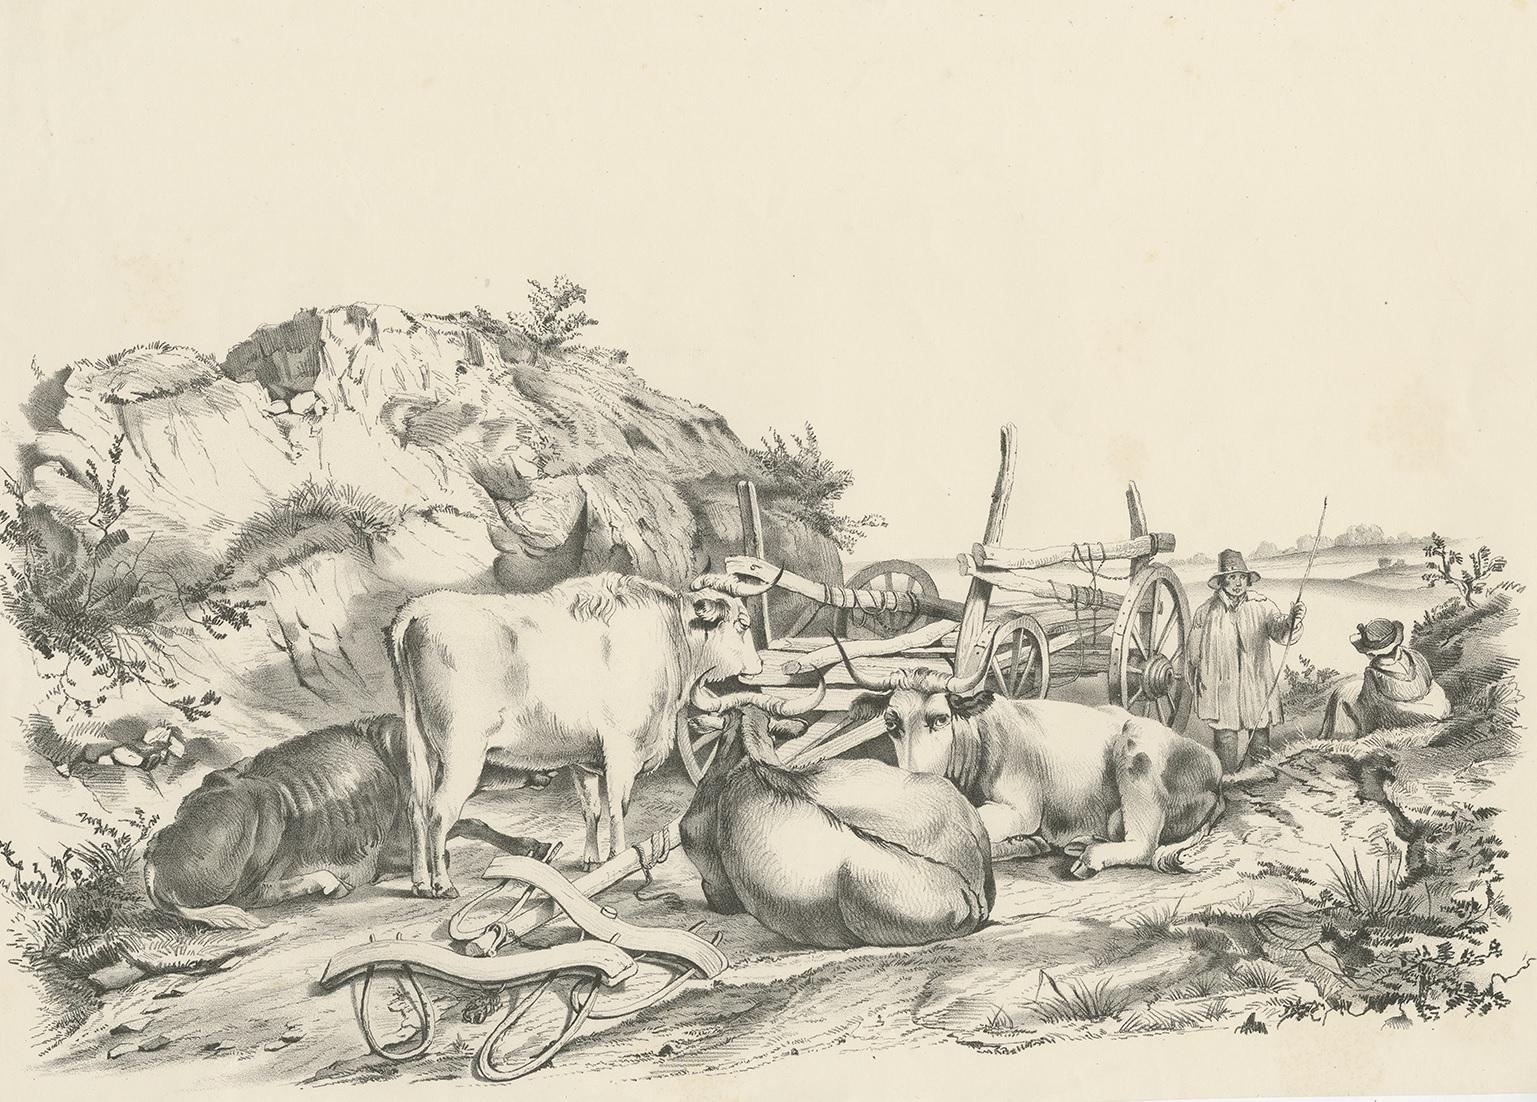 Antique print of various oxen, a cart and farmers. This print originates from 'Cattle Subjects' by Thomas Sidney Cooper. He was an English landscape painter noted for his images of cattle and farm animals.